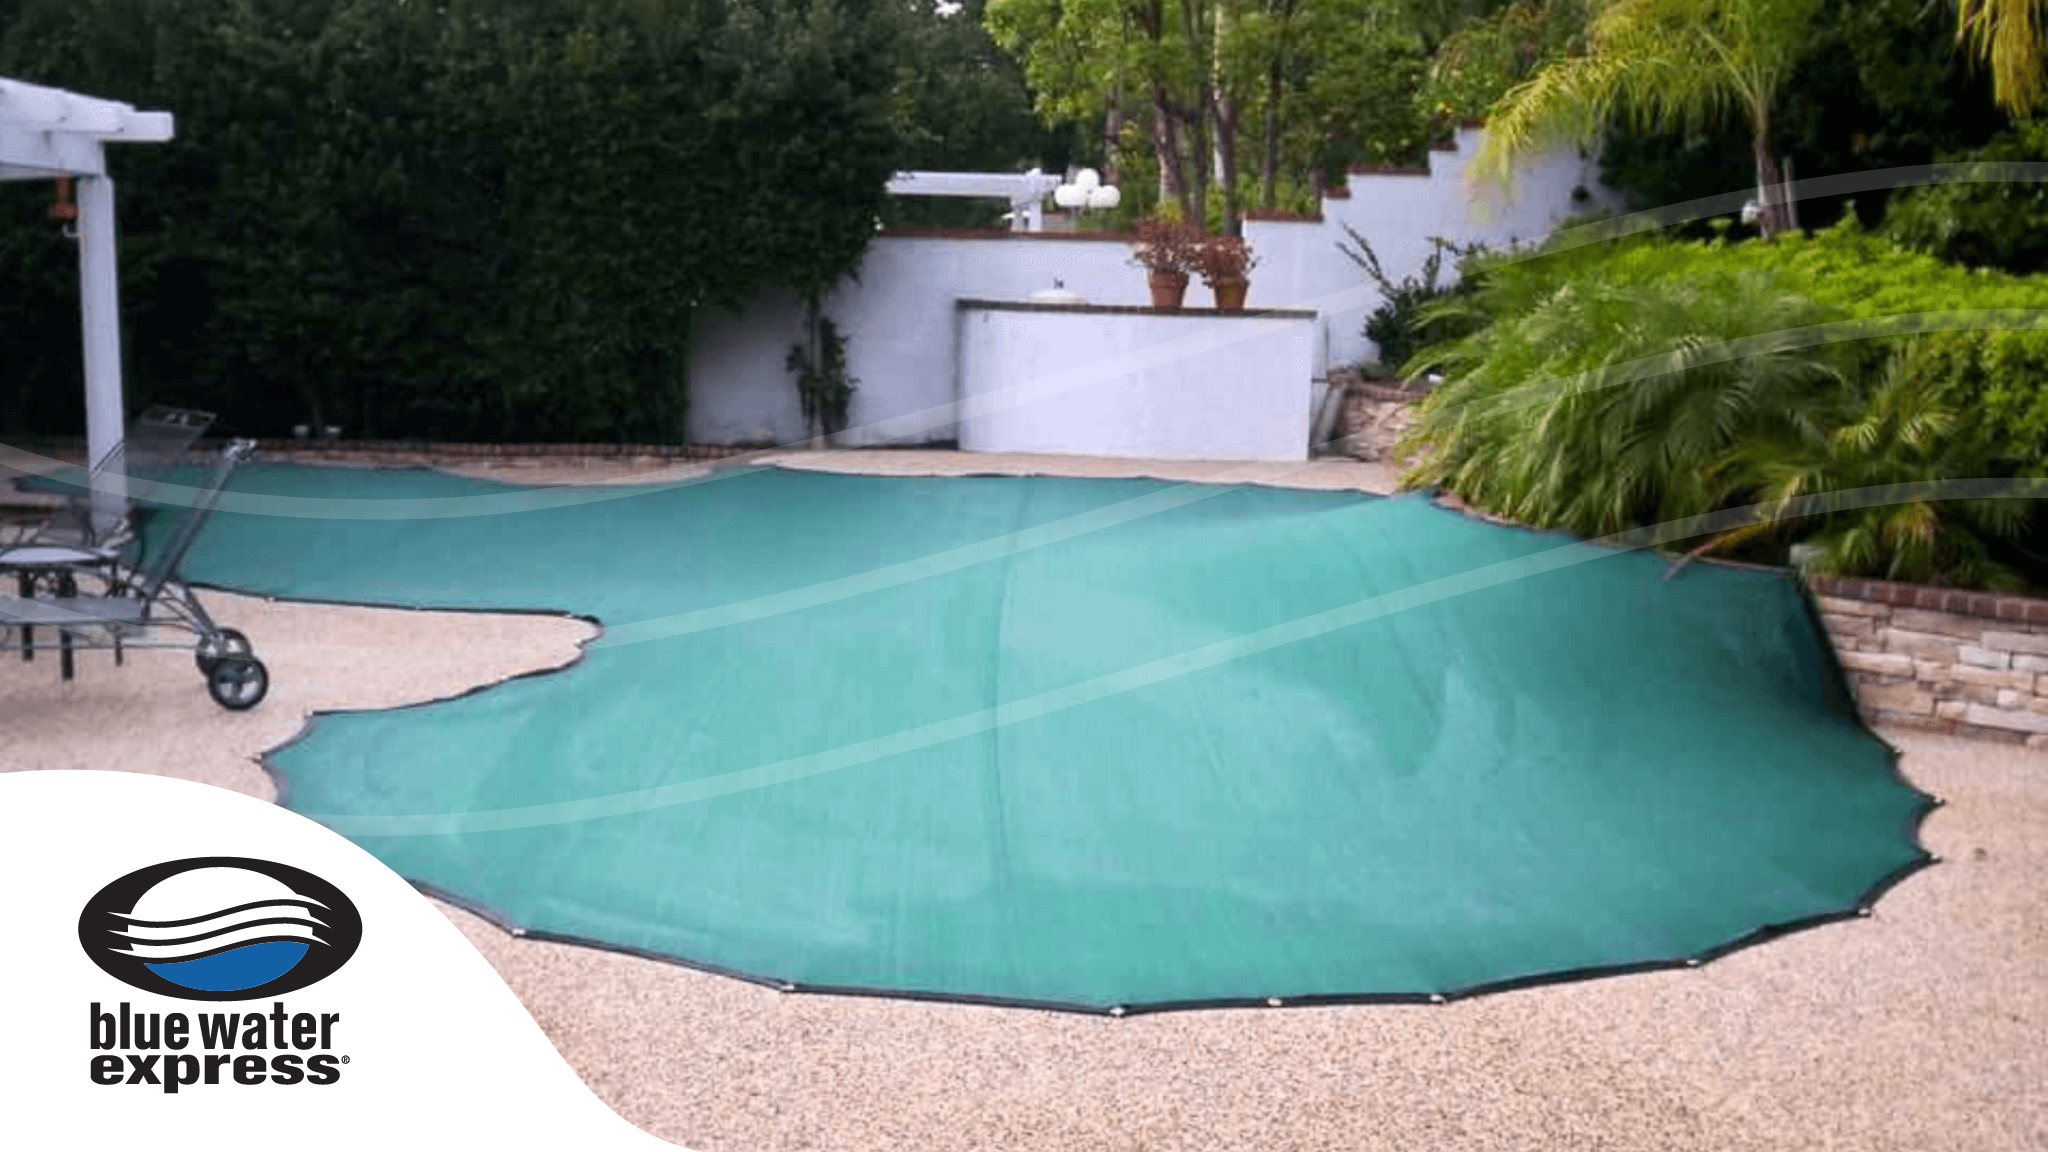 Discover the best options for fall pool care with our guide on pool covers. Find the perfect fit for your pool's needs to ensure longevity and protection.